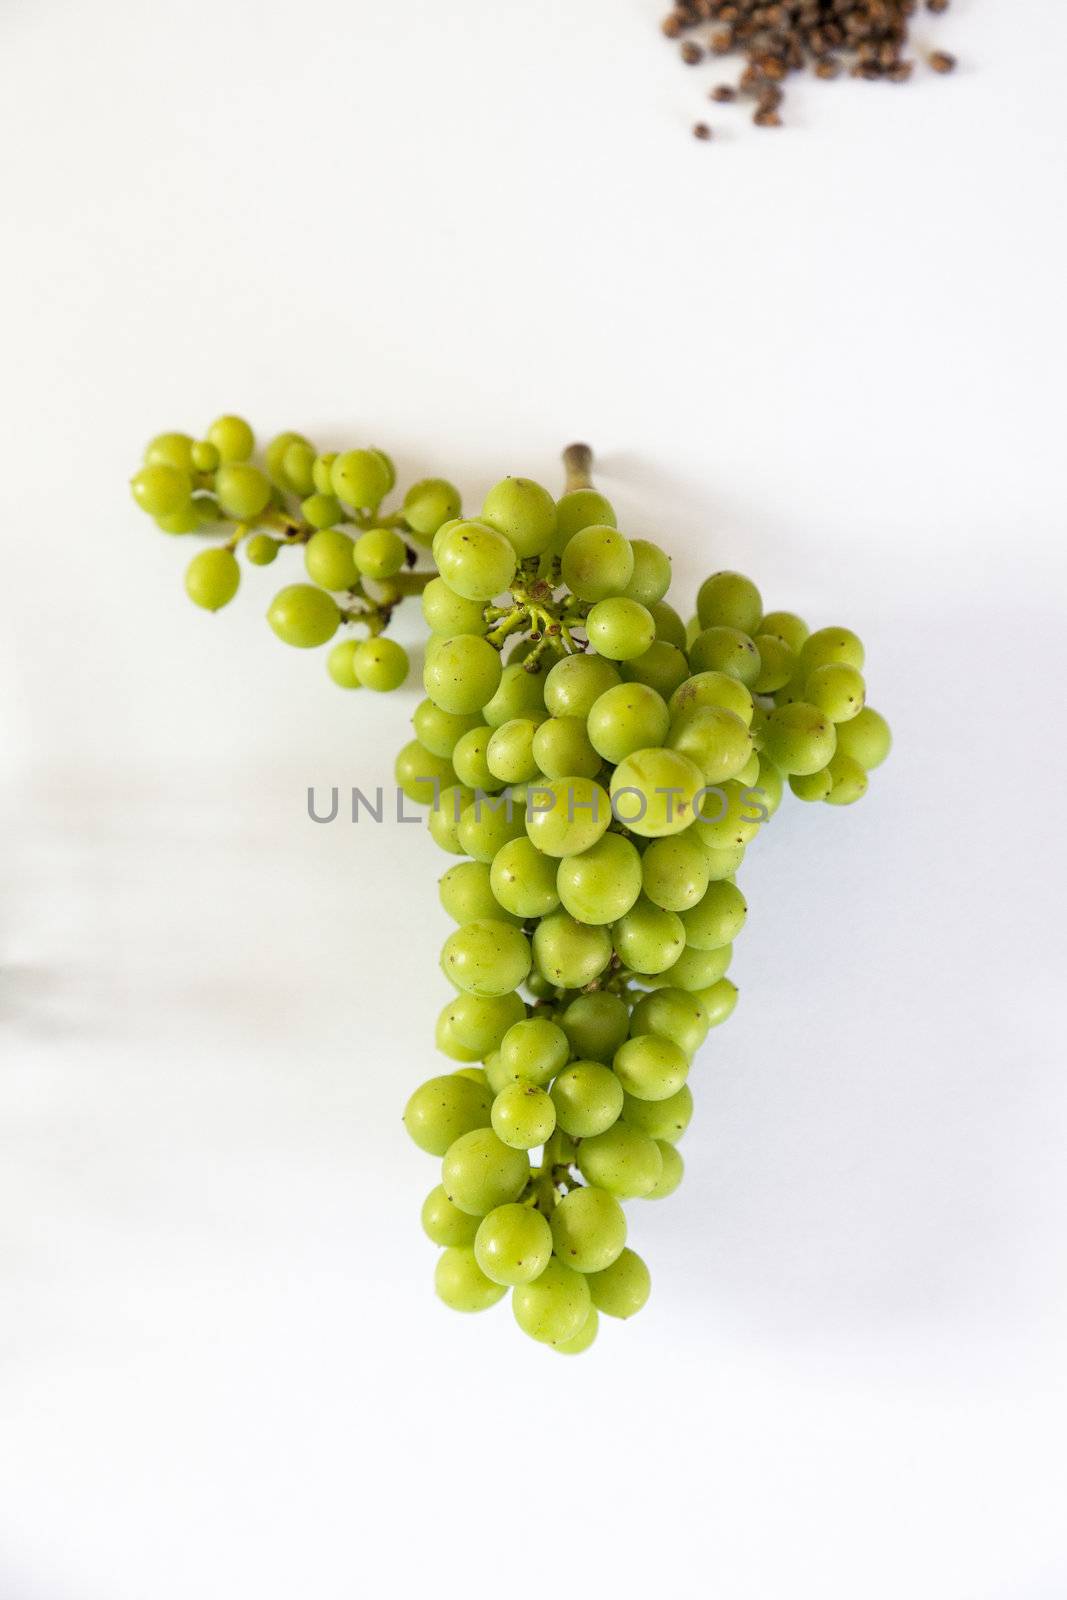 Biological cultivated Grapes by ram_media_pro